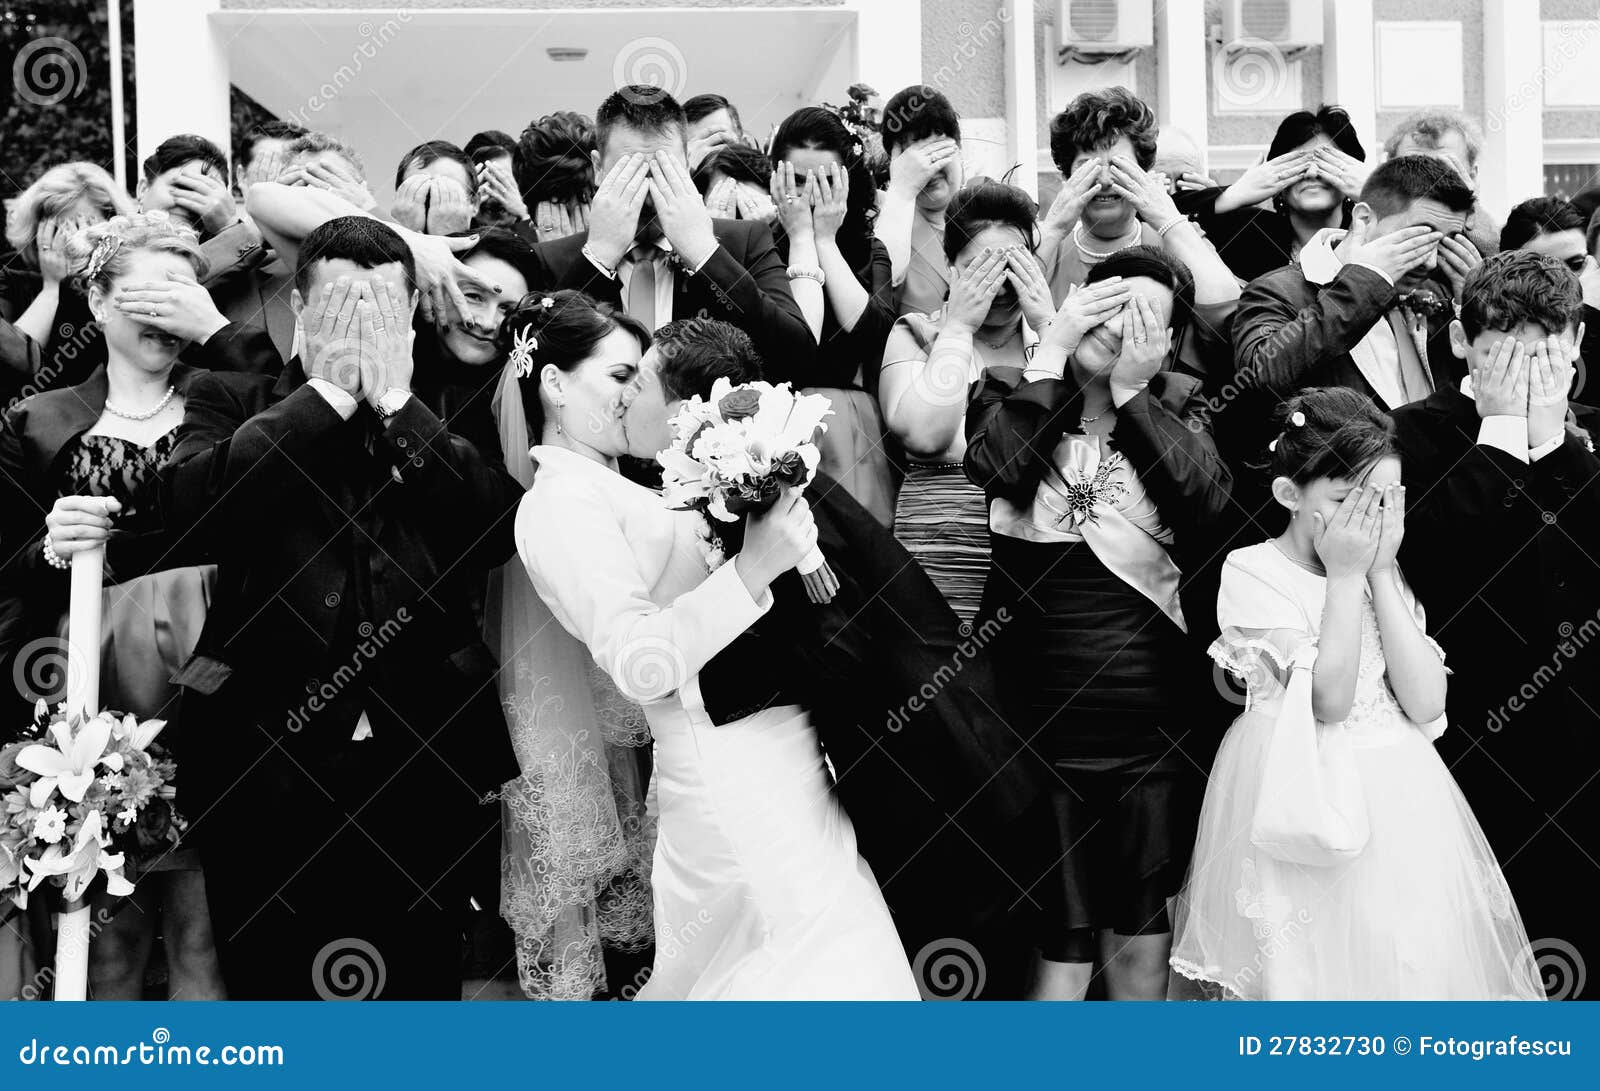 Funny Wedding Formal Picture Editorial Image - Image of friends, scale:  27832730